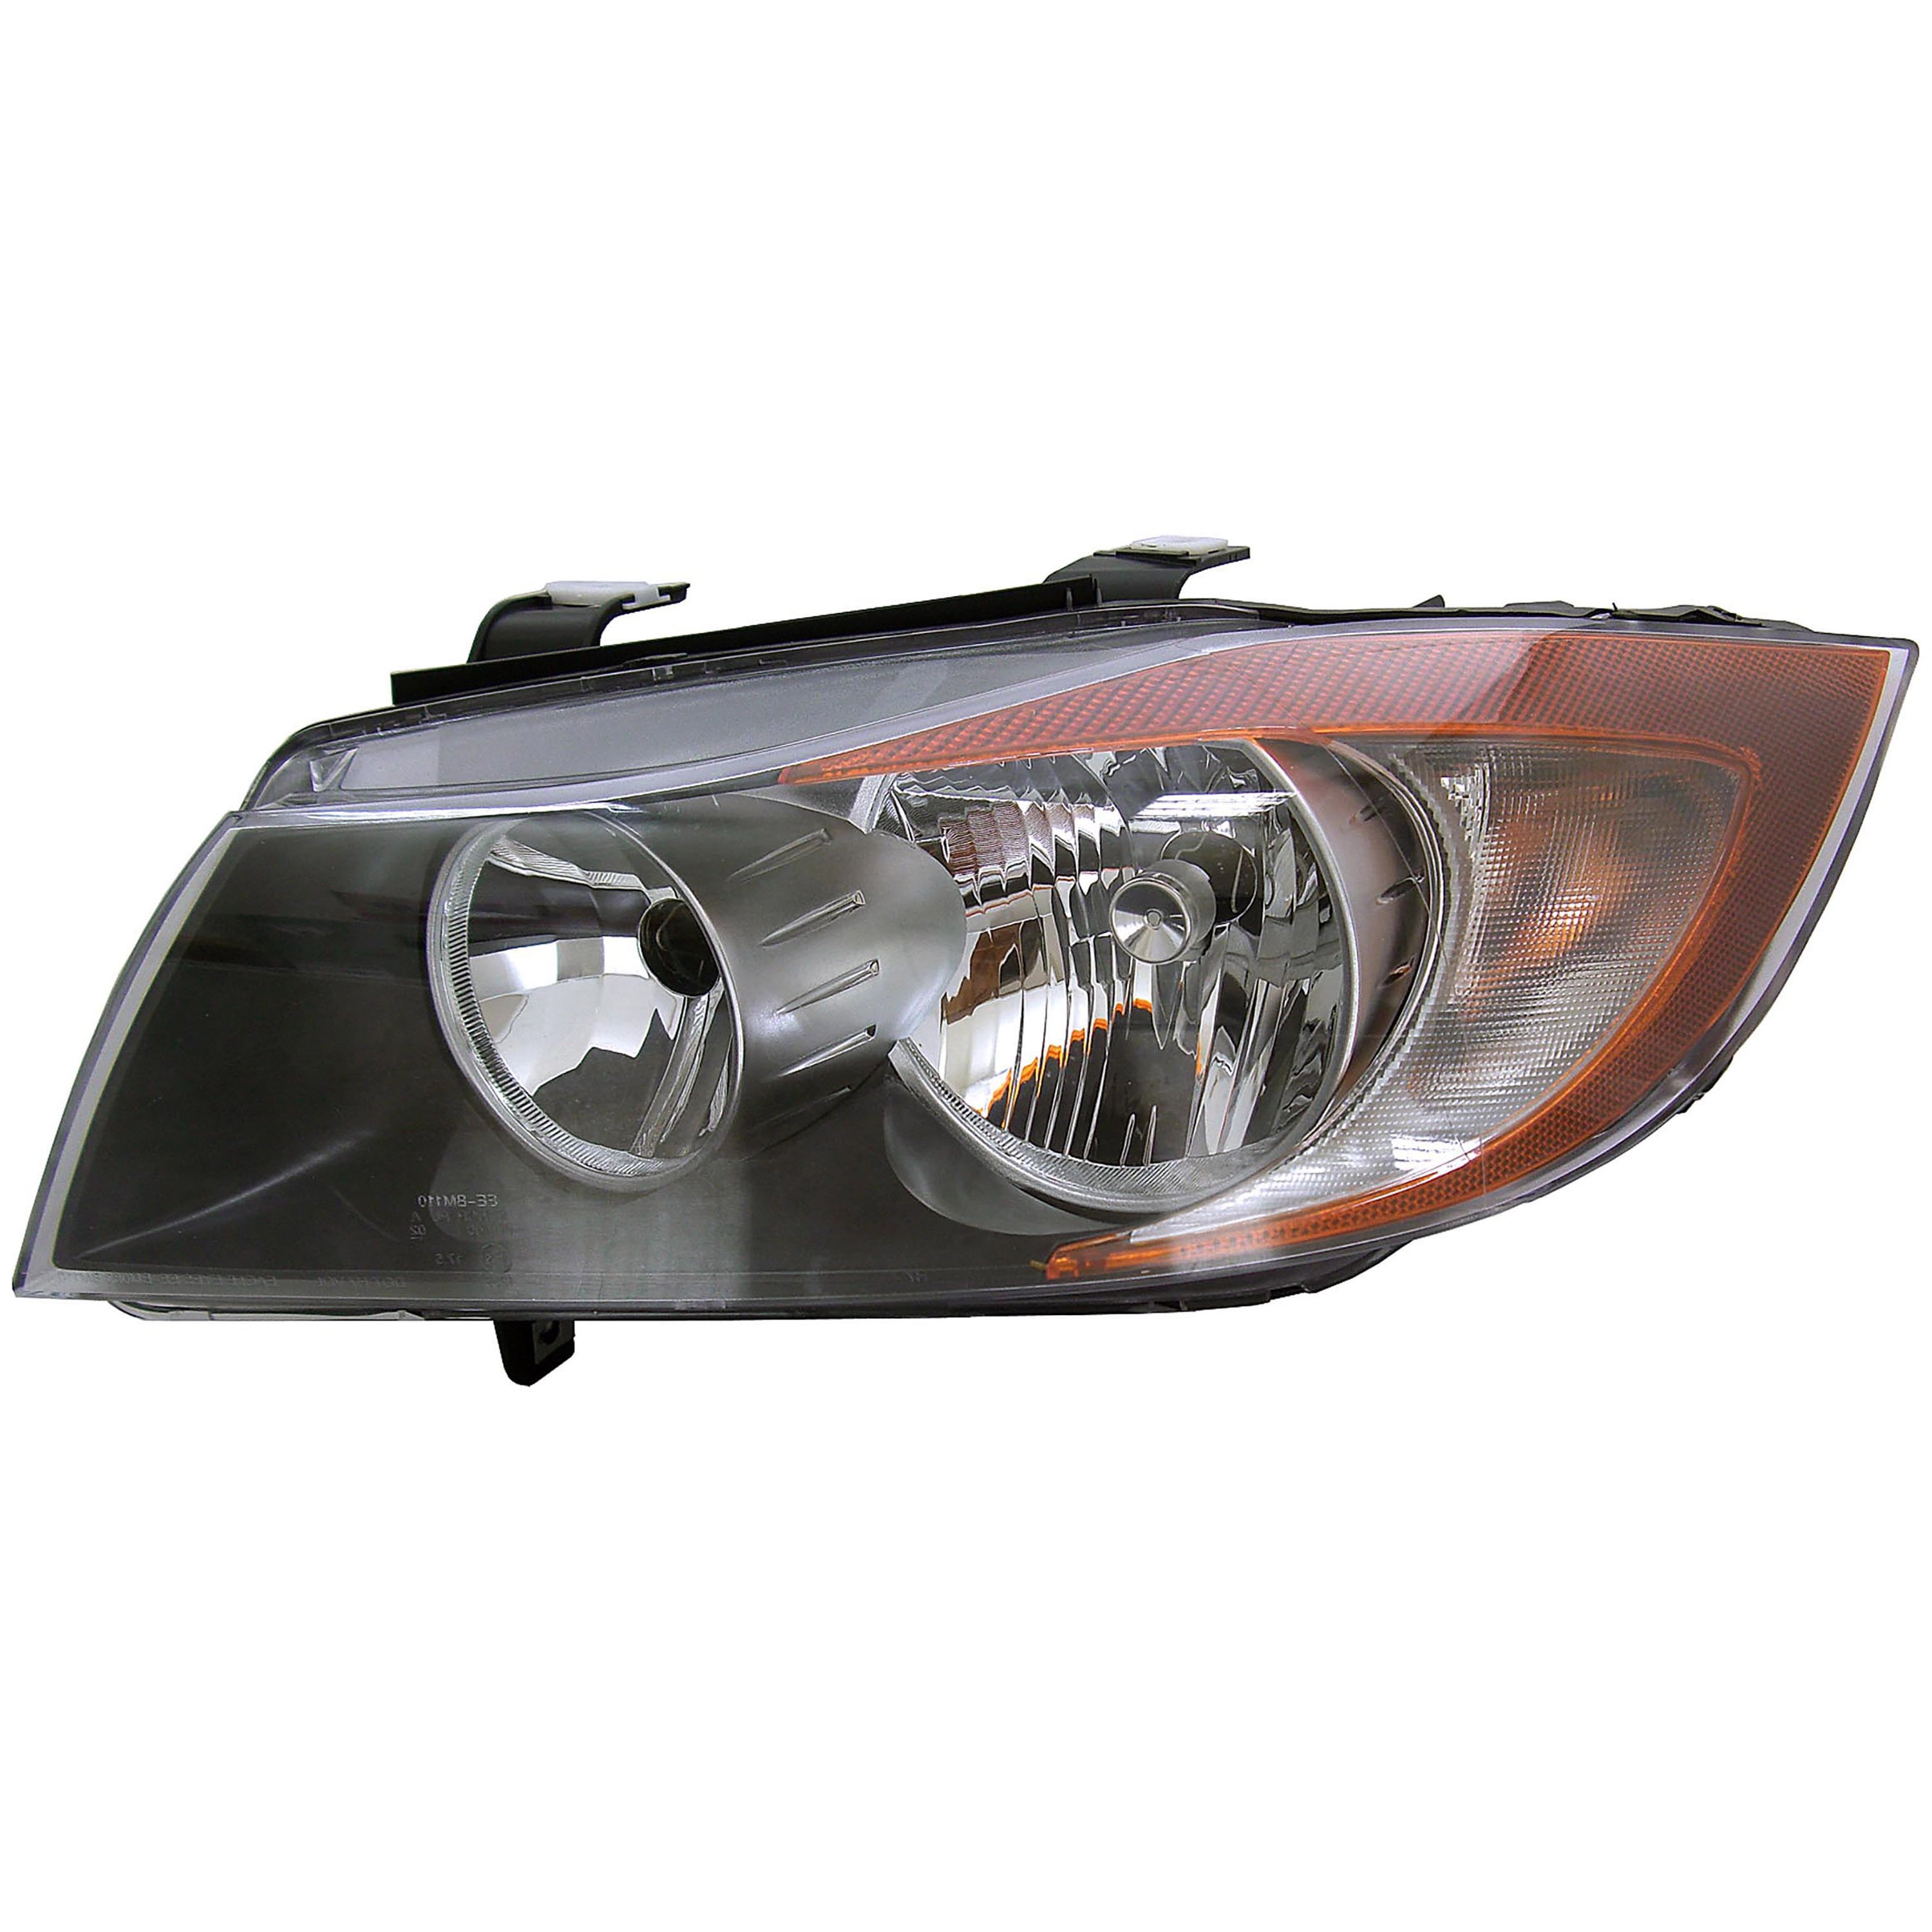 Dorman 1592394 Driver Side Headlight Assembly for Specific BMW Models